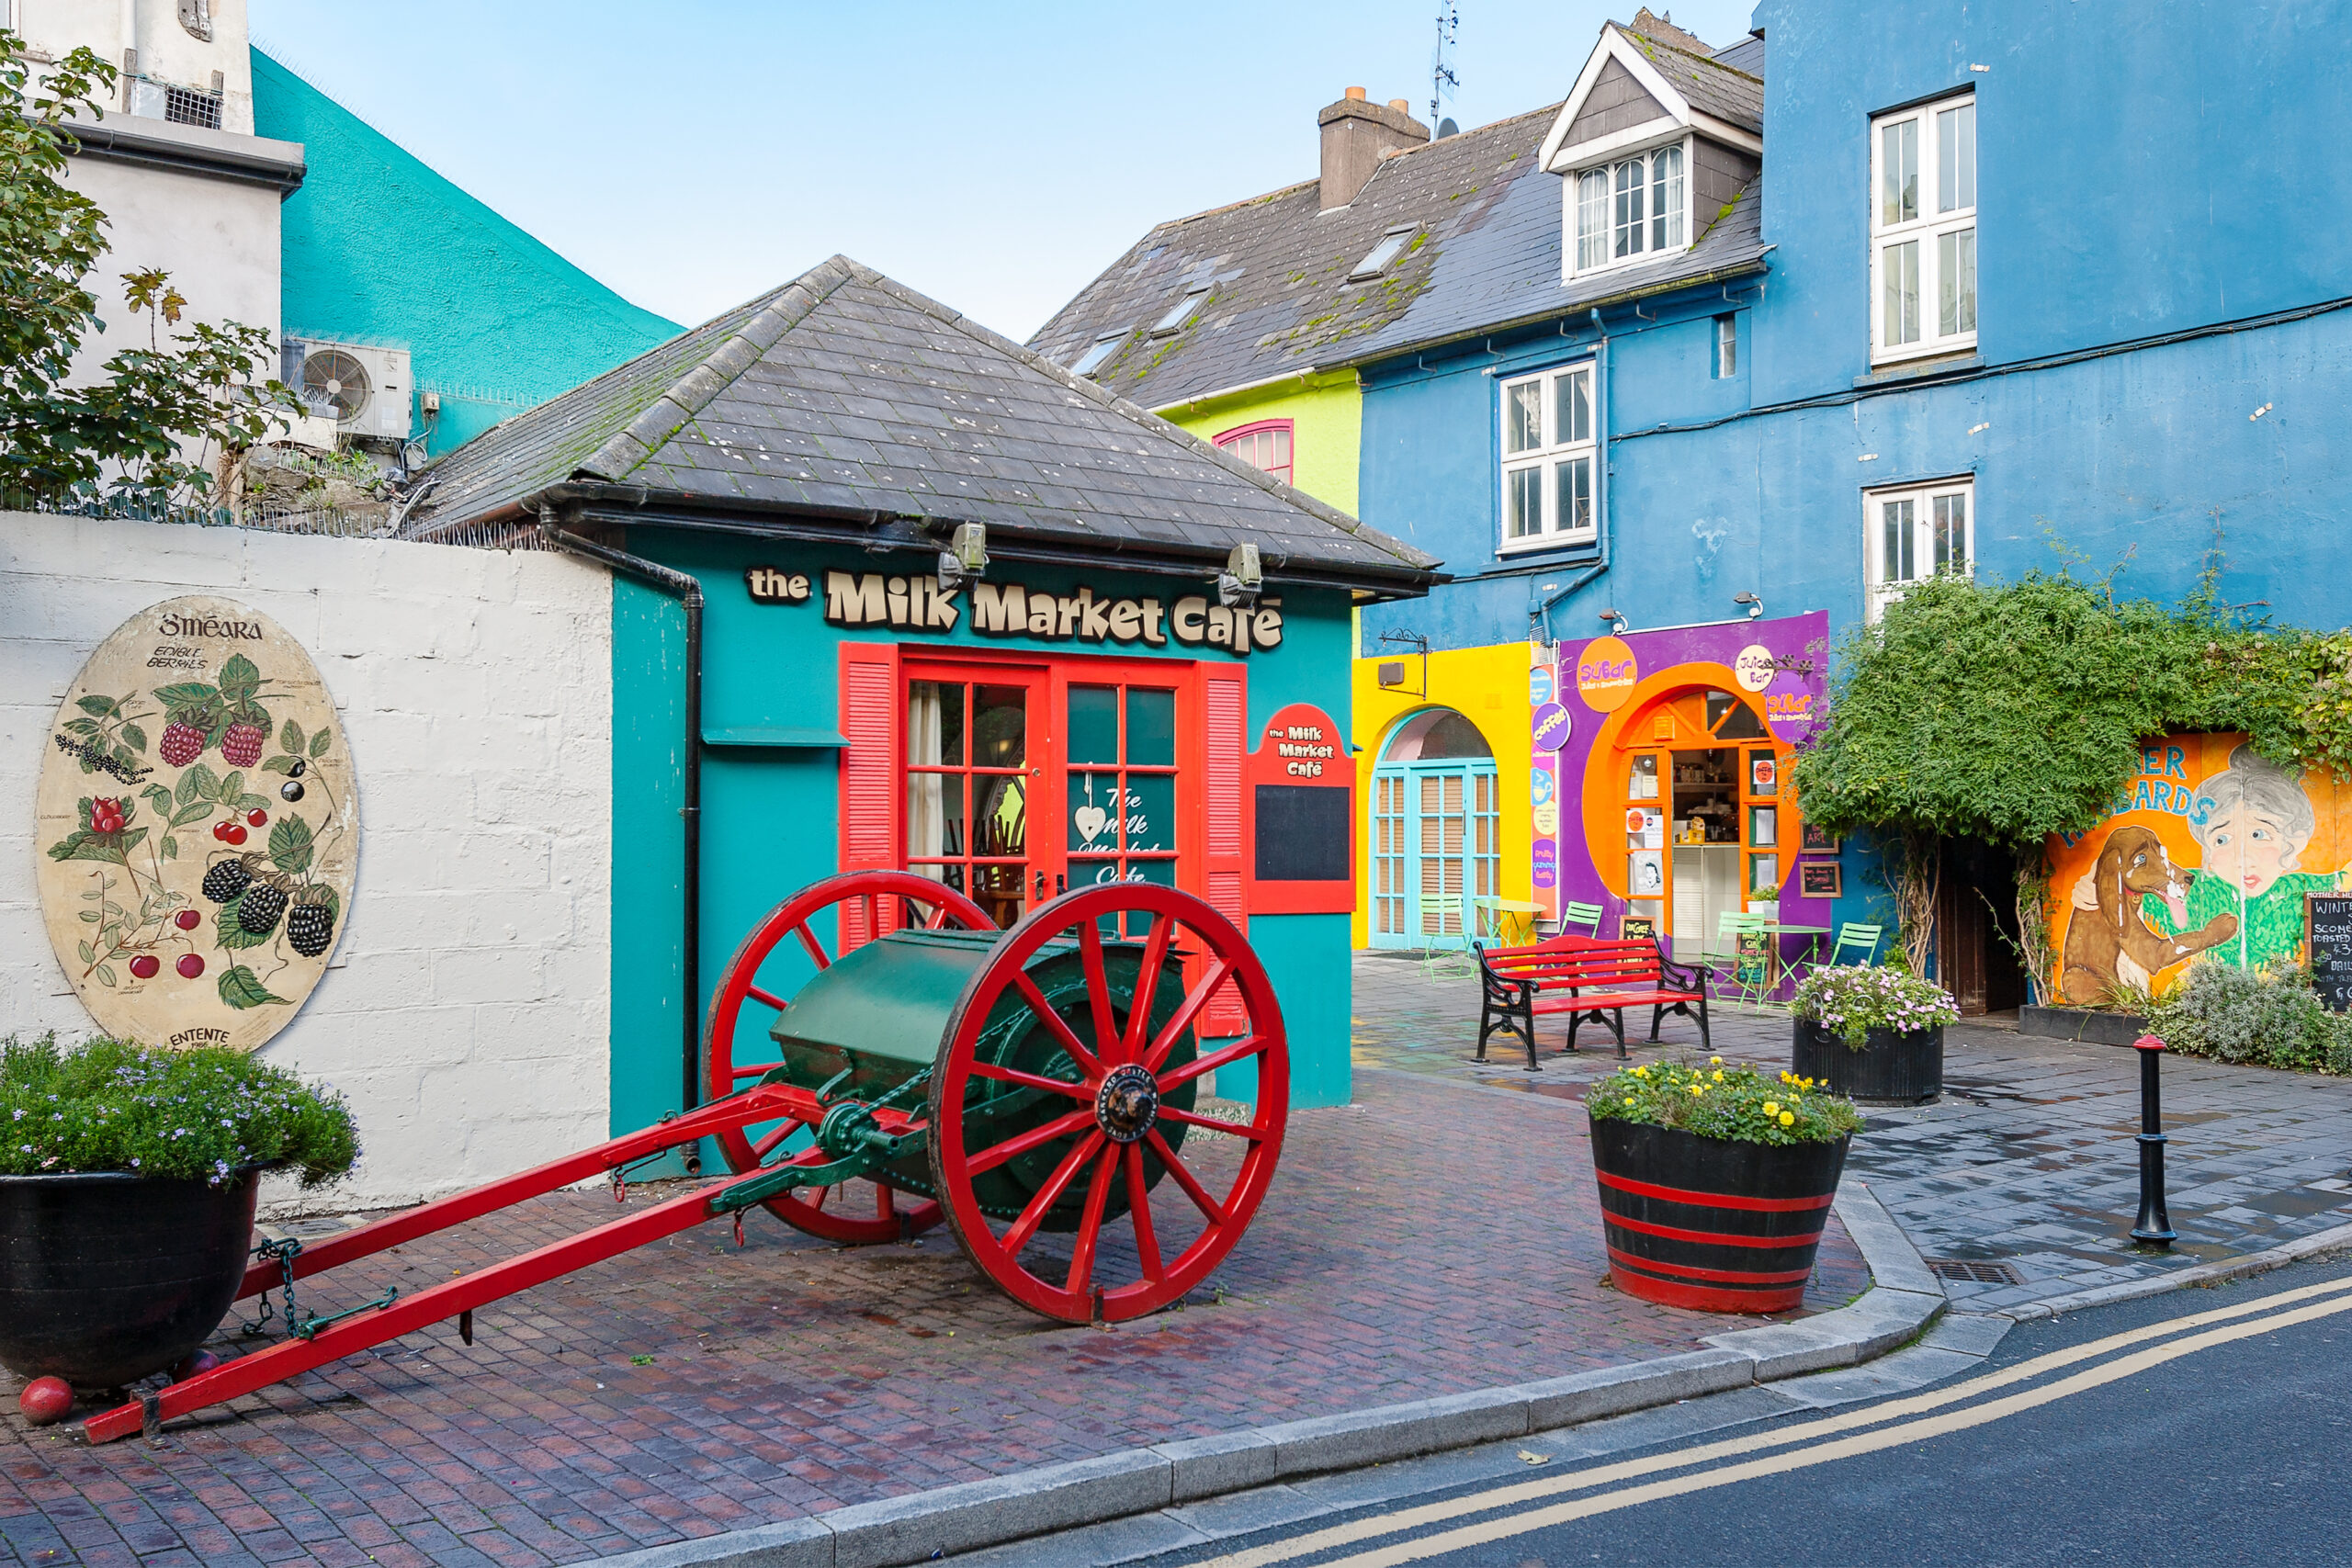 View of an old fashioned street with colorful buildings in Kinsale, Ireland